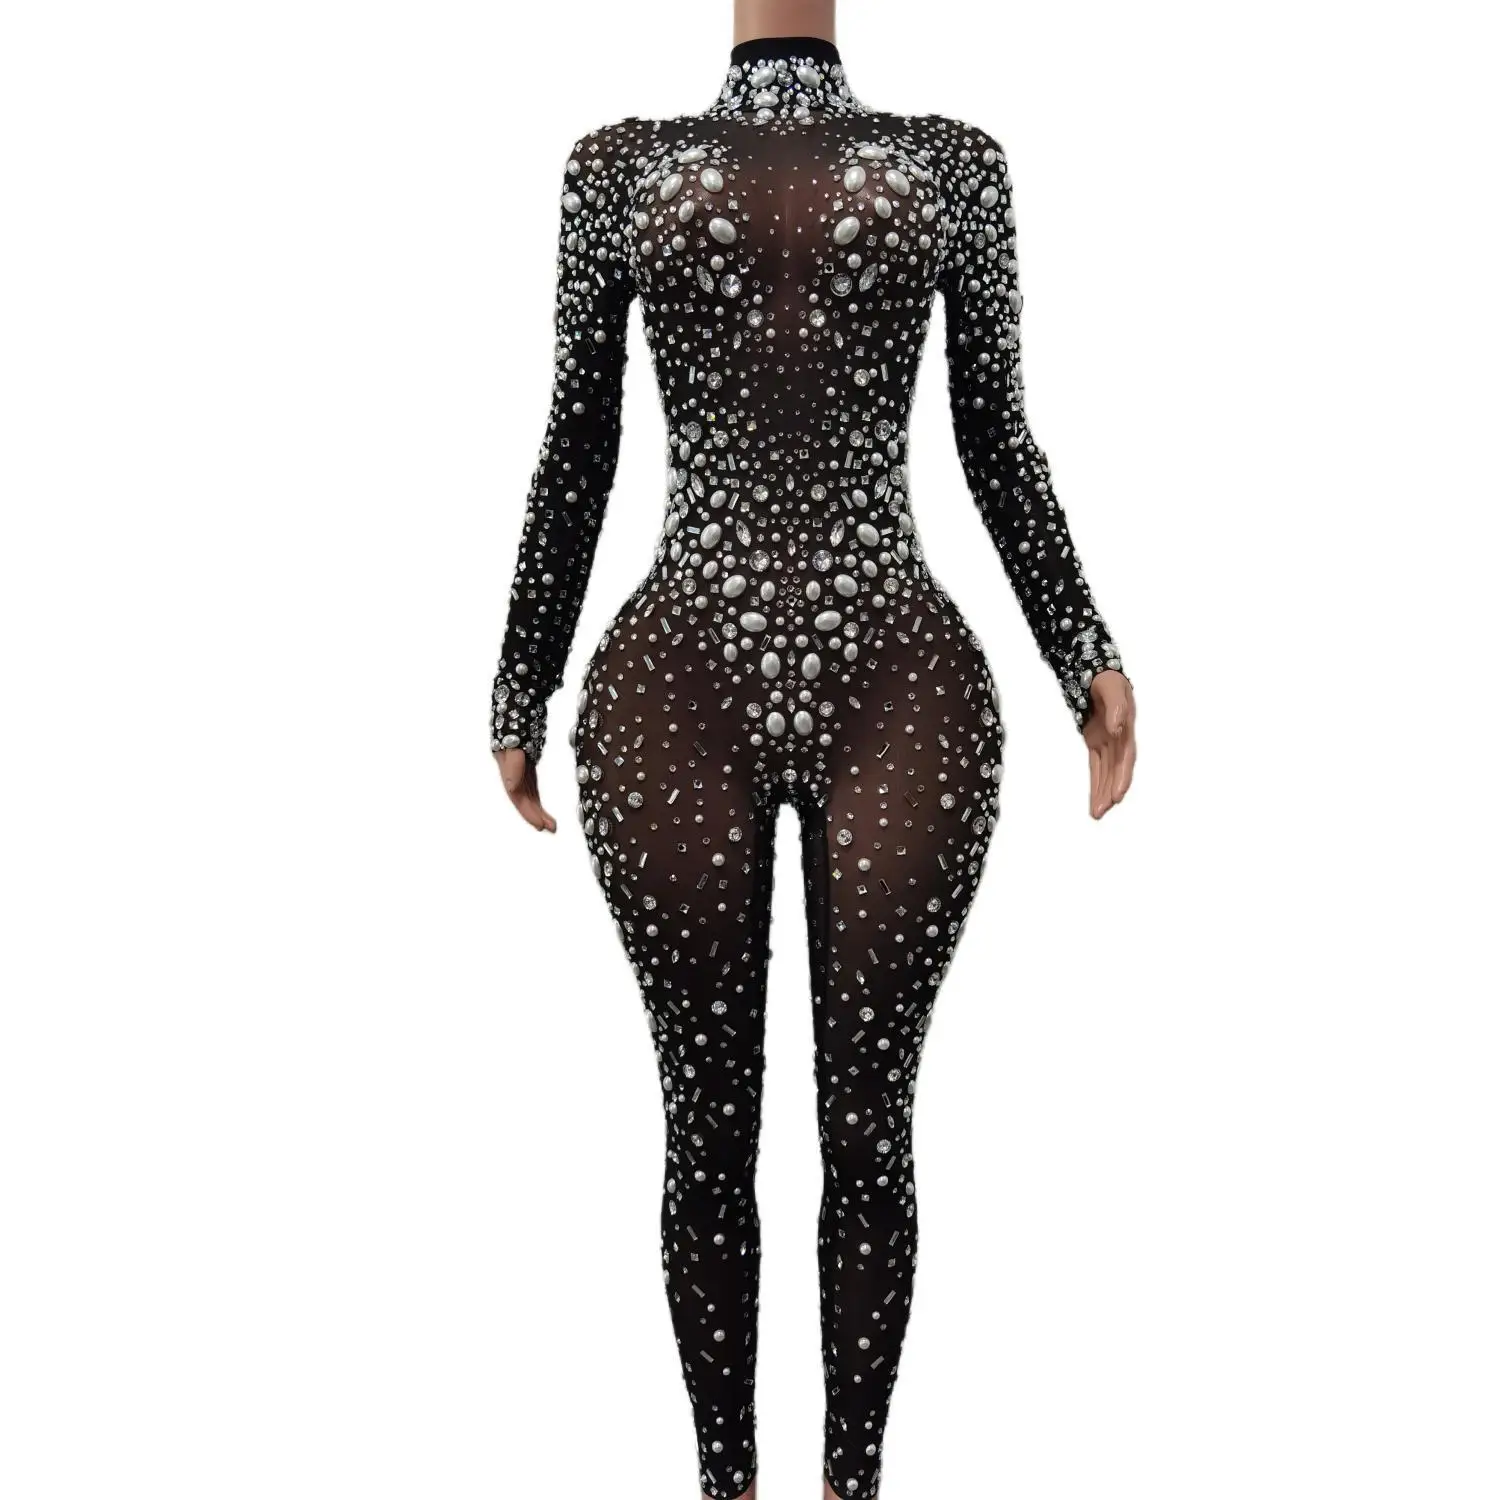 

Fashion Long Sleeve See Through Club Rompers Female Dancer Outfits Bodycon One Piece Bodysuit Women Sexy Rhinestone Jumpsuit